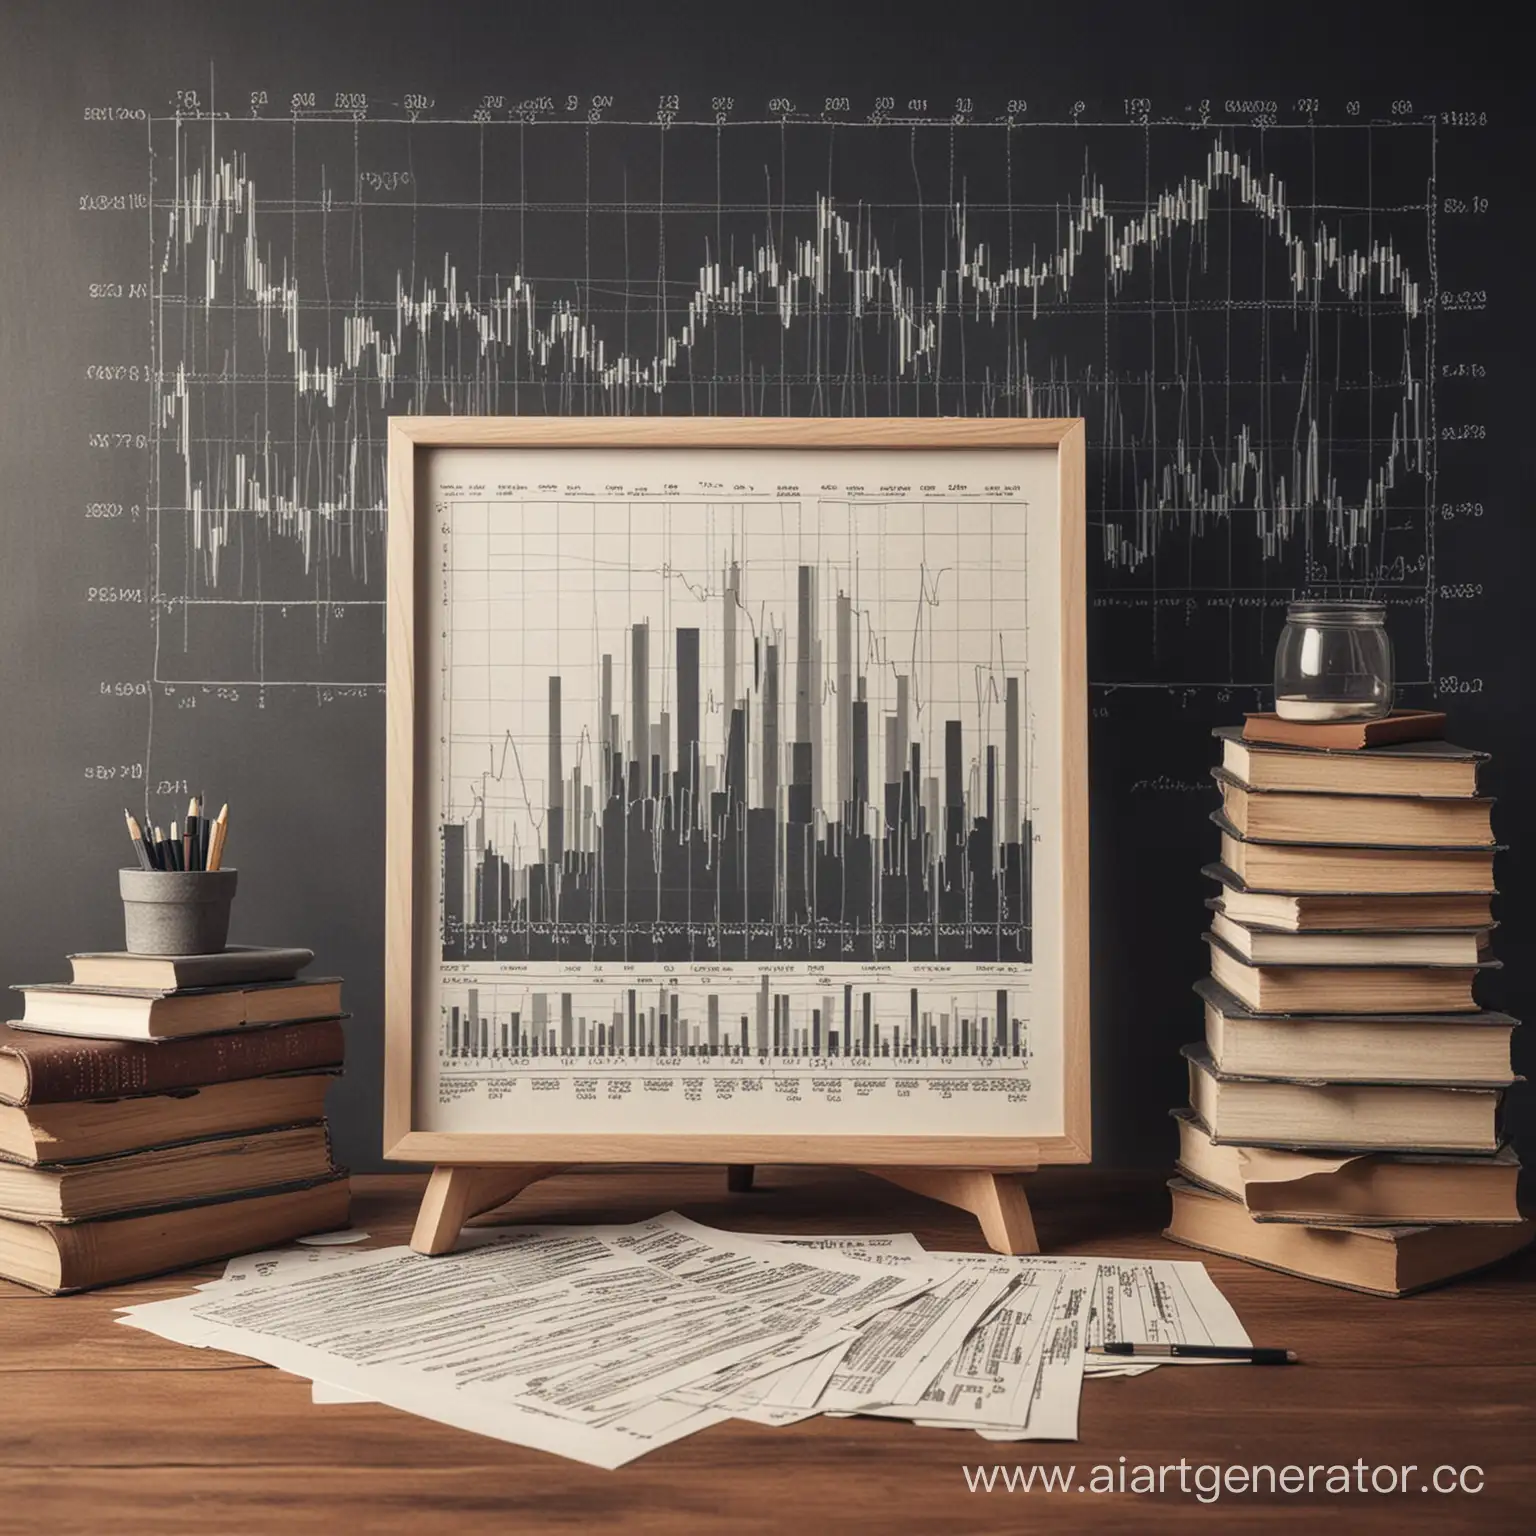 Create a picture with stock charts and a stack of books. The picture should be clear and catchy.